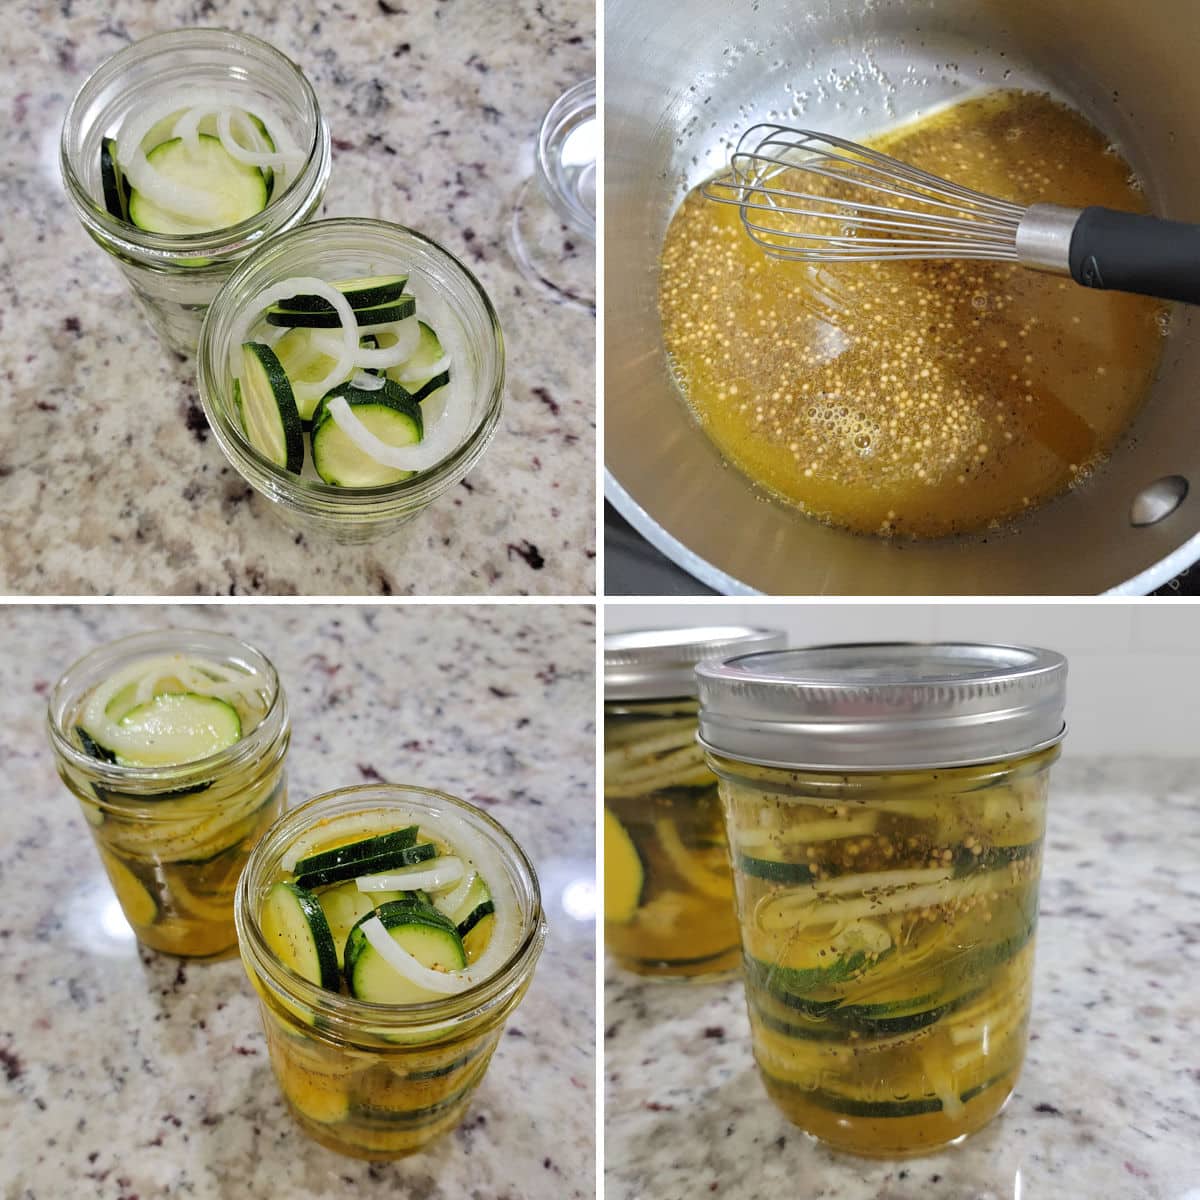 Making bread and butter zucchini pickles in glass mason jars.